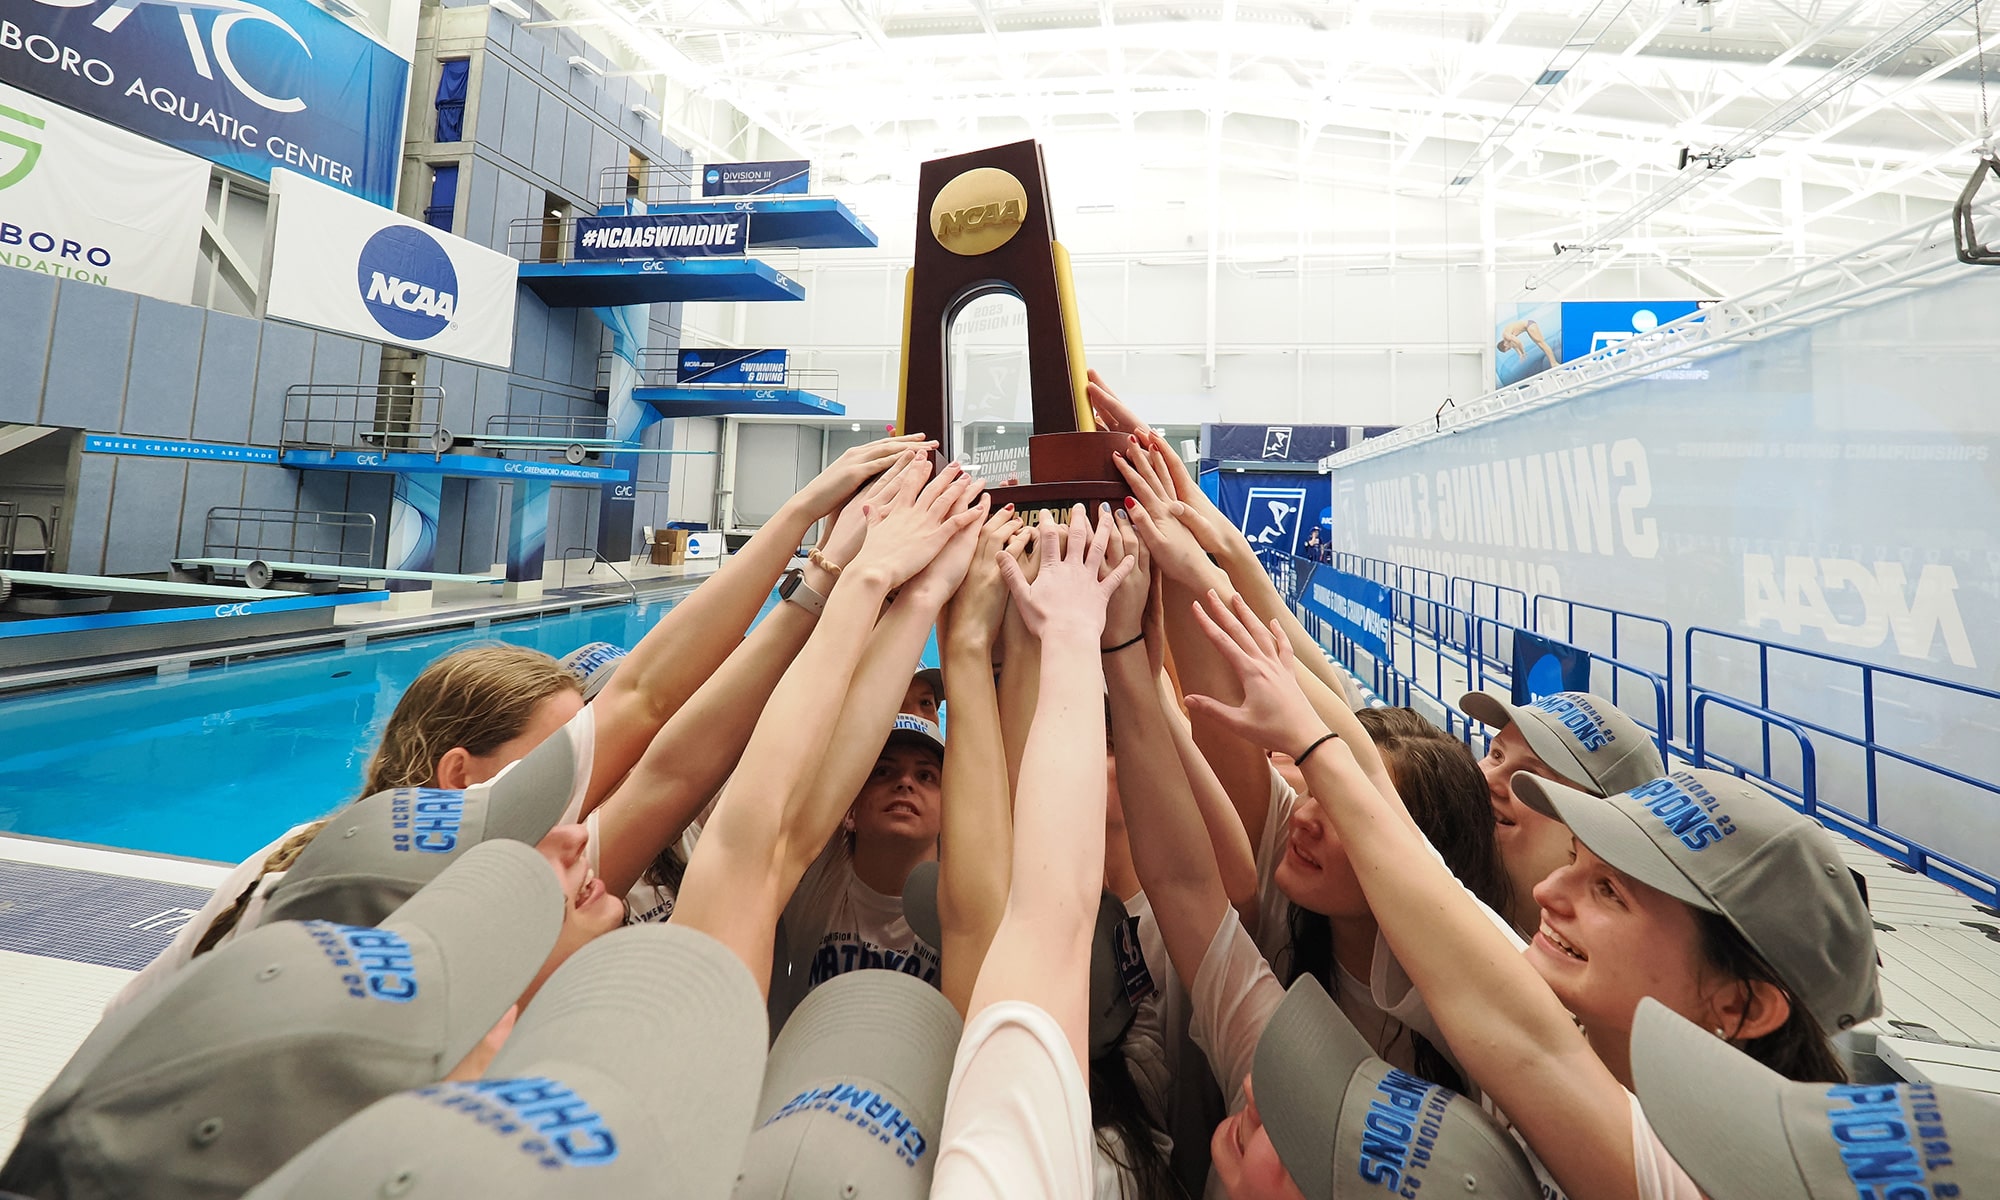 The team holds the championship trophy aloft after the meet in Greensboro, North Carolina.